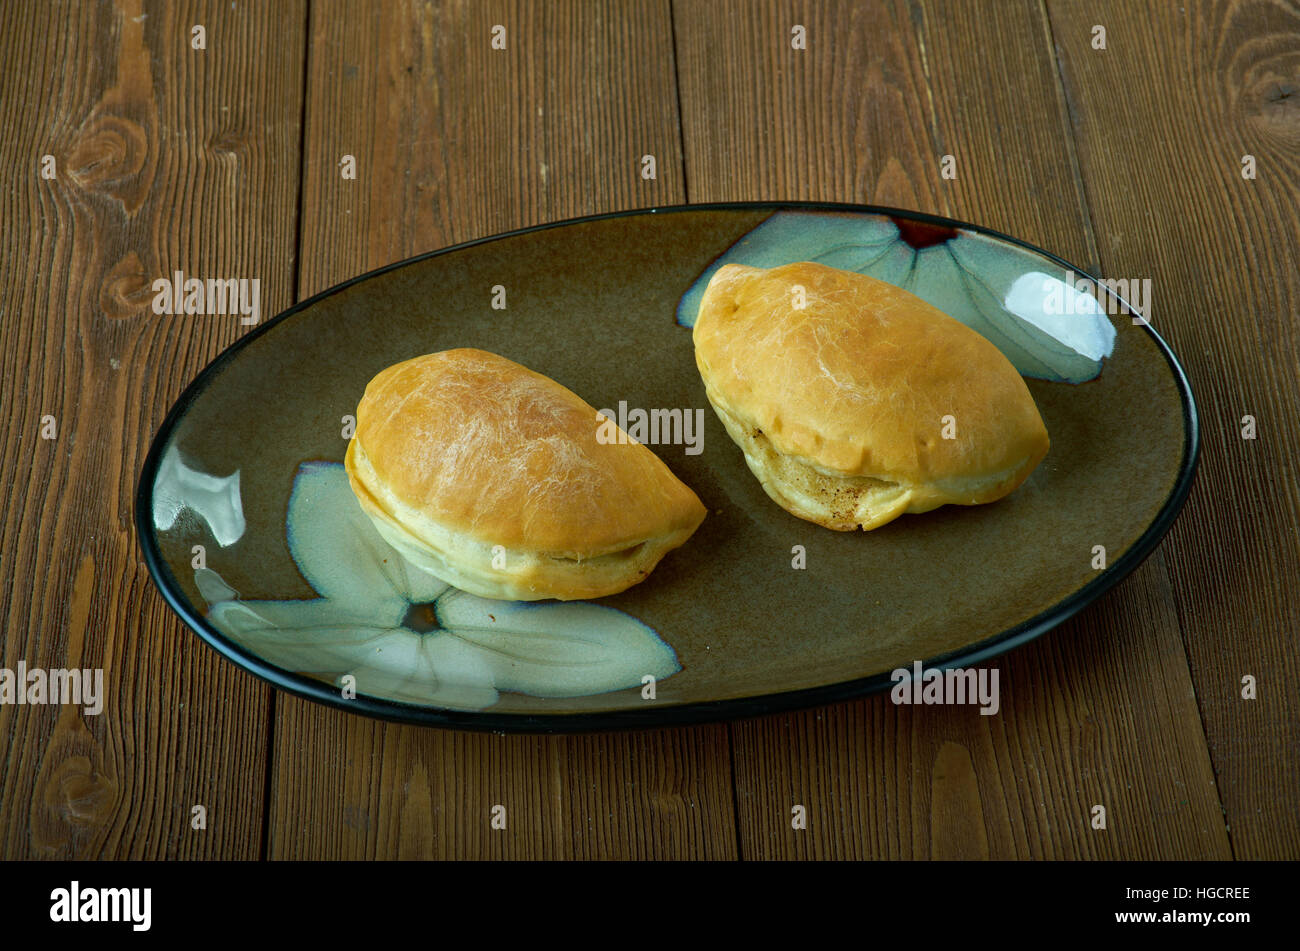 Panada stuffed bread or pastry baked or fried in many countries in Spain and Latin America Stock Photo